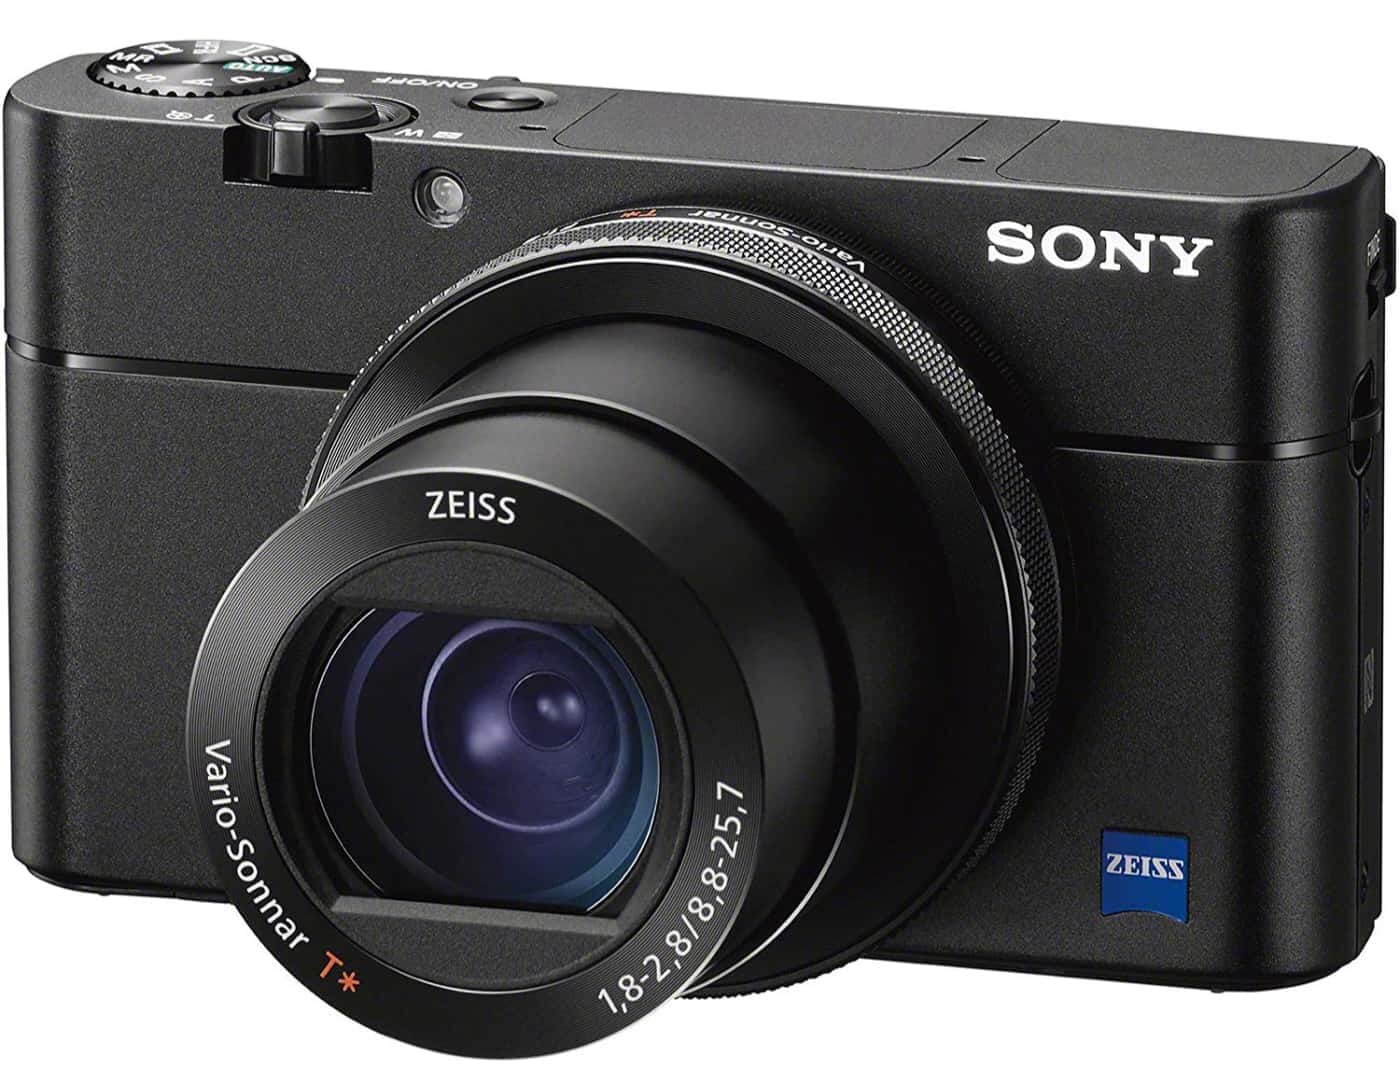 Sony DSC-RX100 Comparison -the Newest Sony RX100 VI vs. Older 